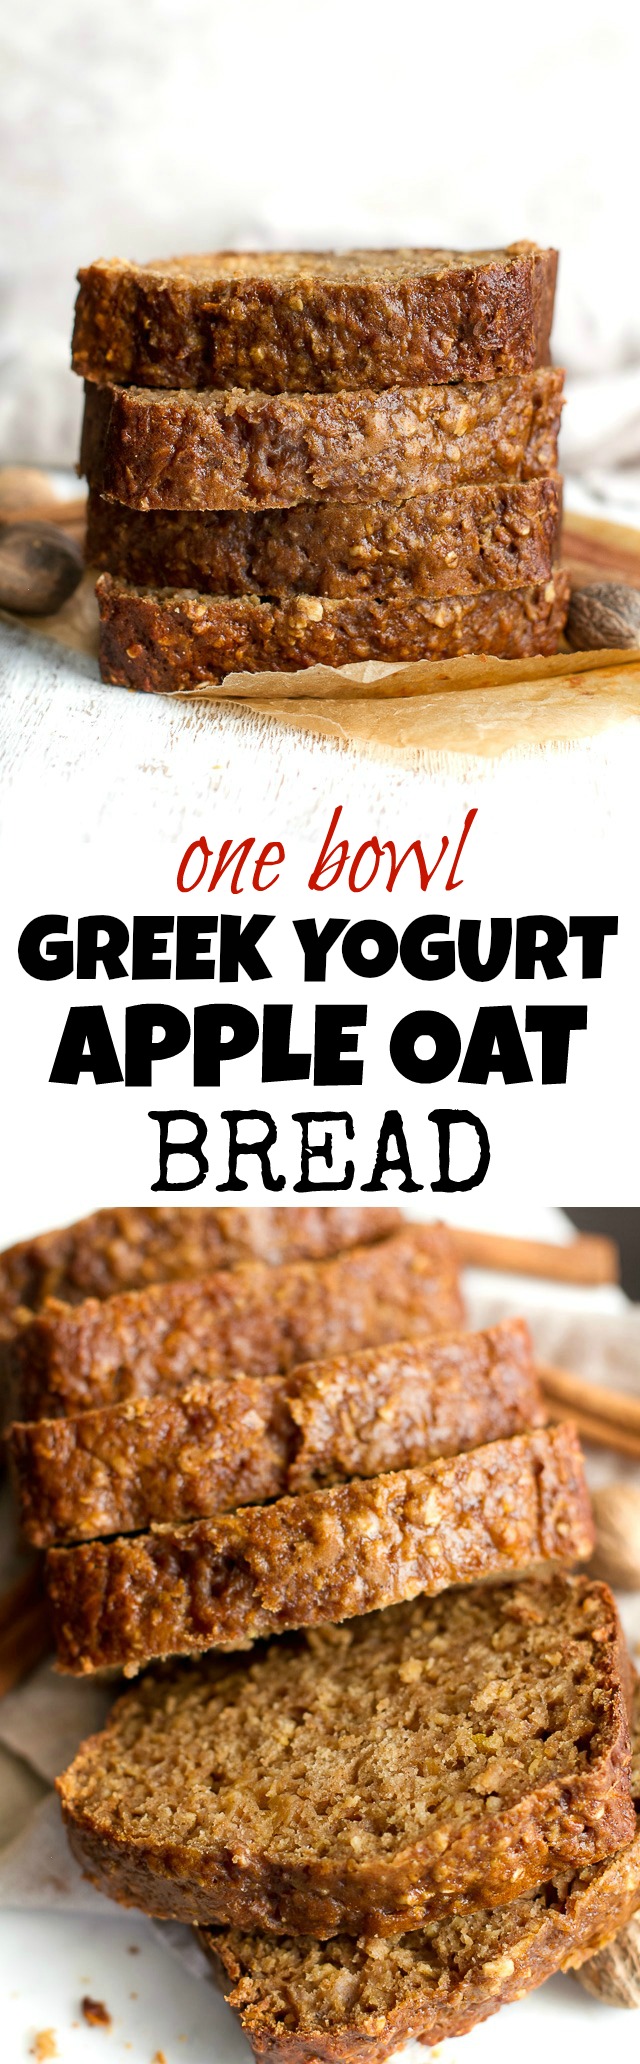 This One Bowl Greek Yogurt Apple Oat Bread recipe is made without butter, oil, or refined sugar, but so tender and flavourful that you’d never be able to tell it's healthy! | runningwithspoons.com